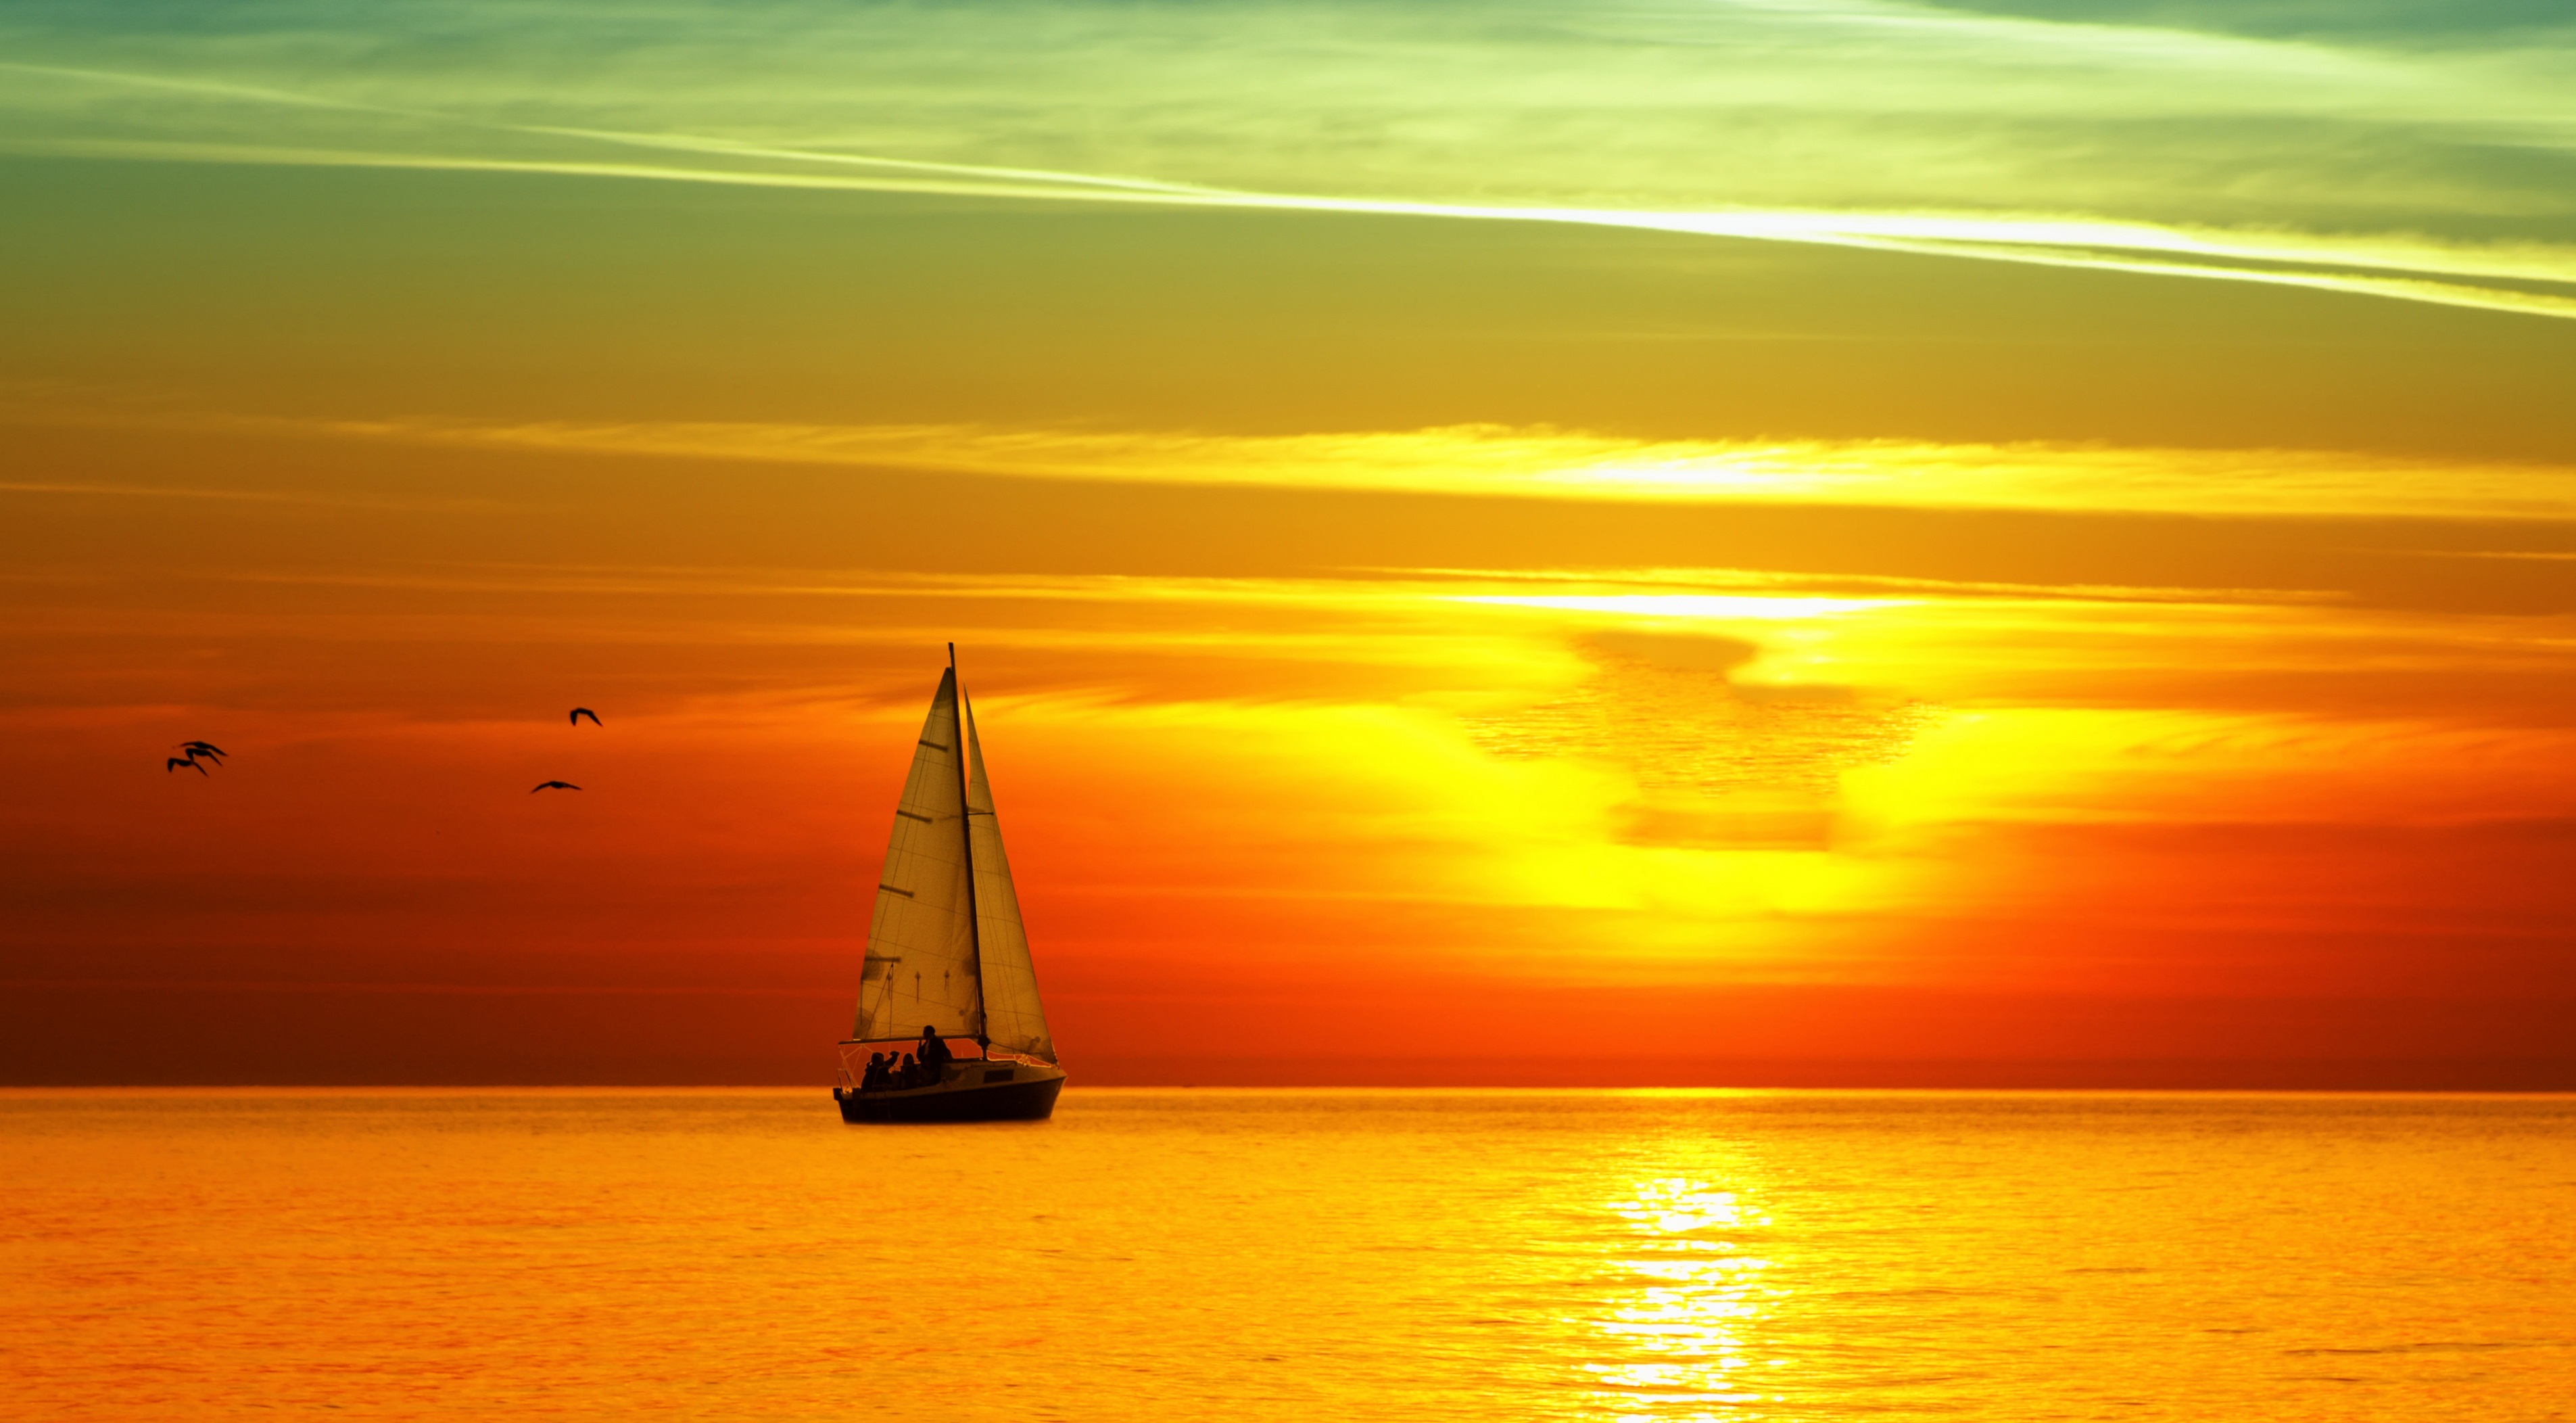 Sailing Boat At Sunset Wallpaper Free - Boat In The Sunset - HD Wallpaper 